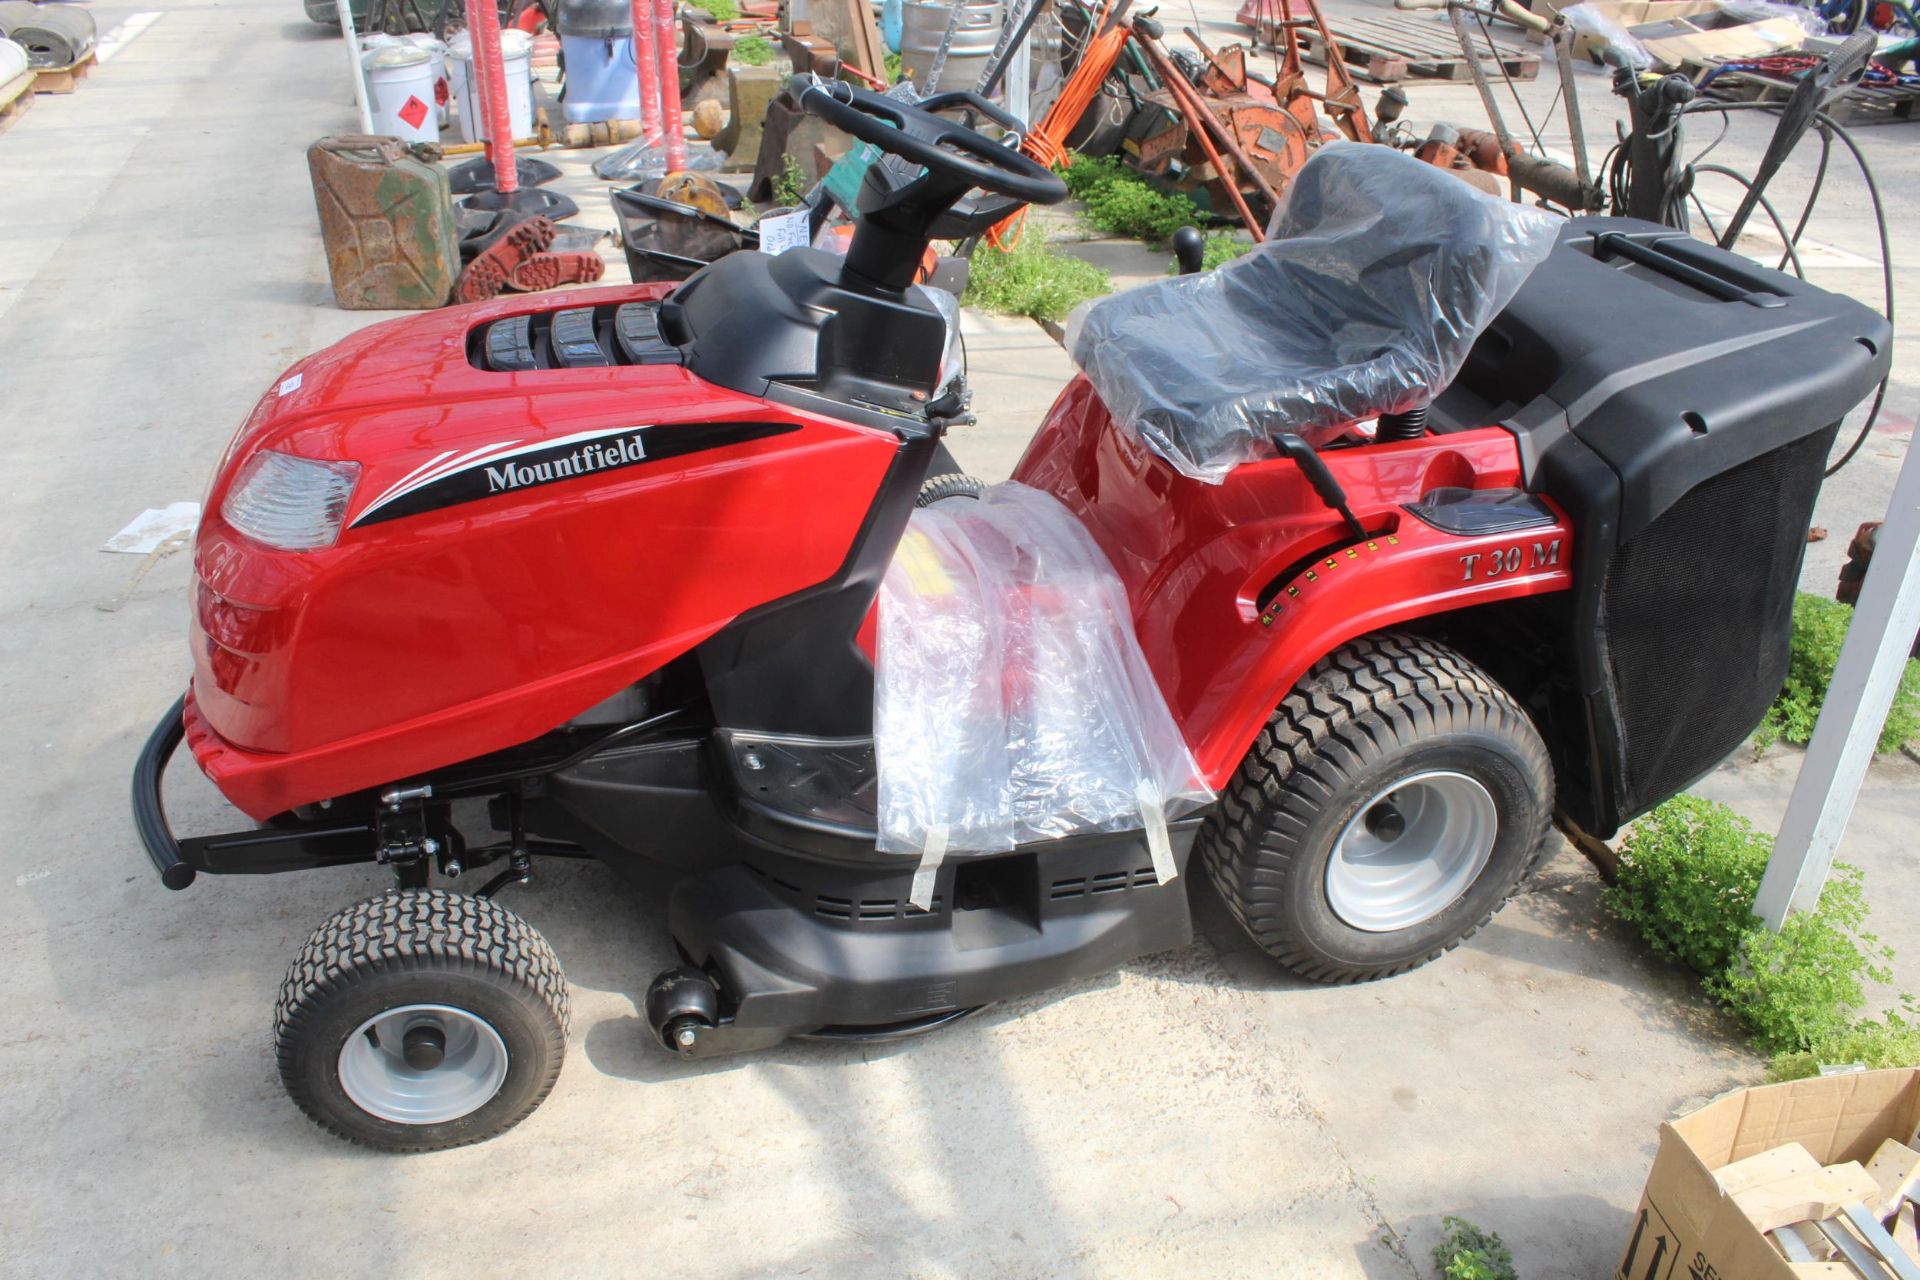 A NEW MOUNTFIELD T30M RIDE ON LAWN MOWER COMPLETE WITH A 200L REAR GRASS BOX POWERED BY A STIGG